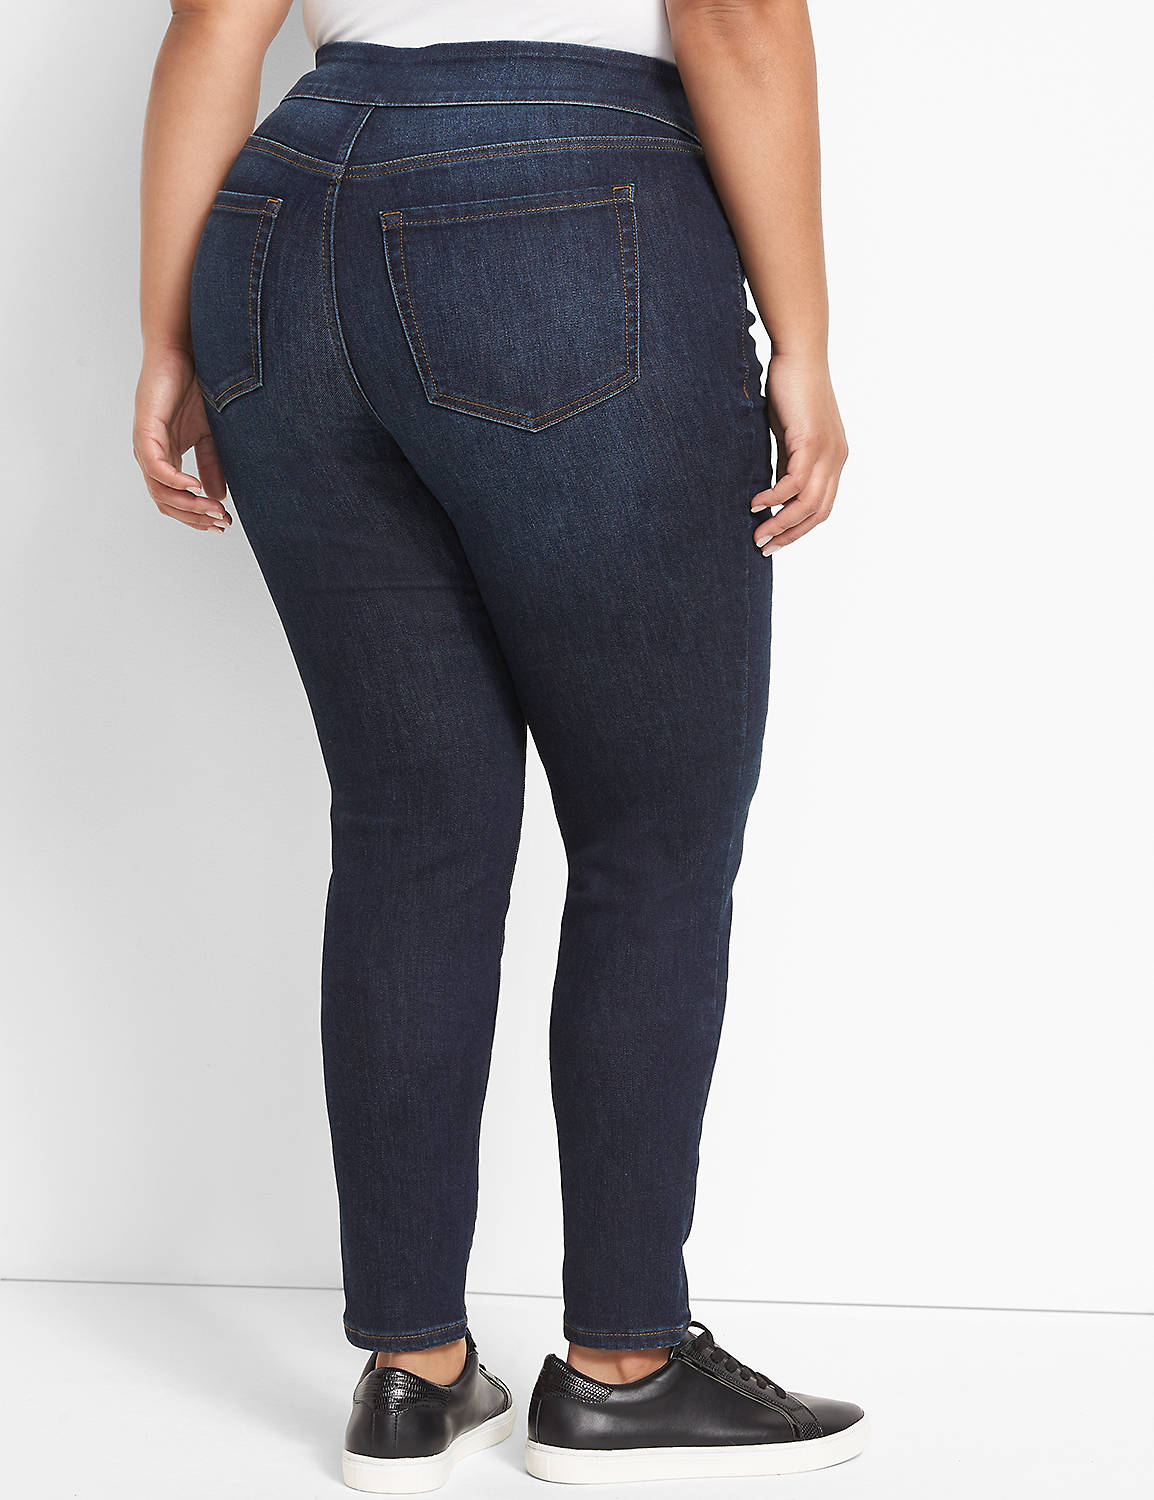 High-Rise Cozy Pull-On Jegging - Dark Wash Product Image 2